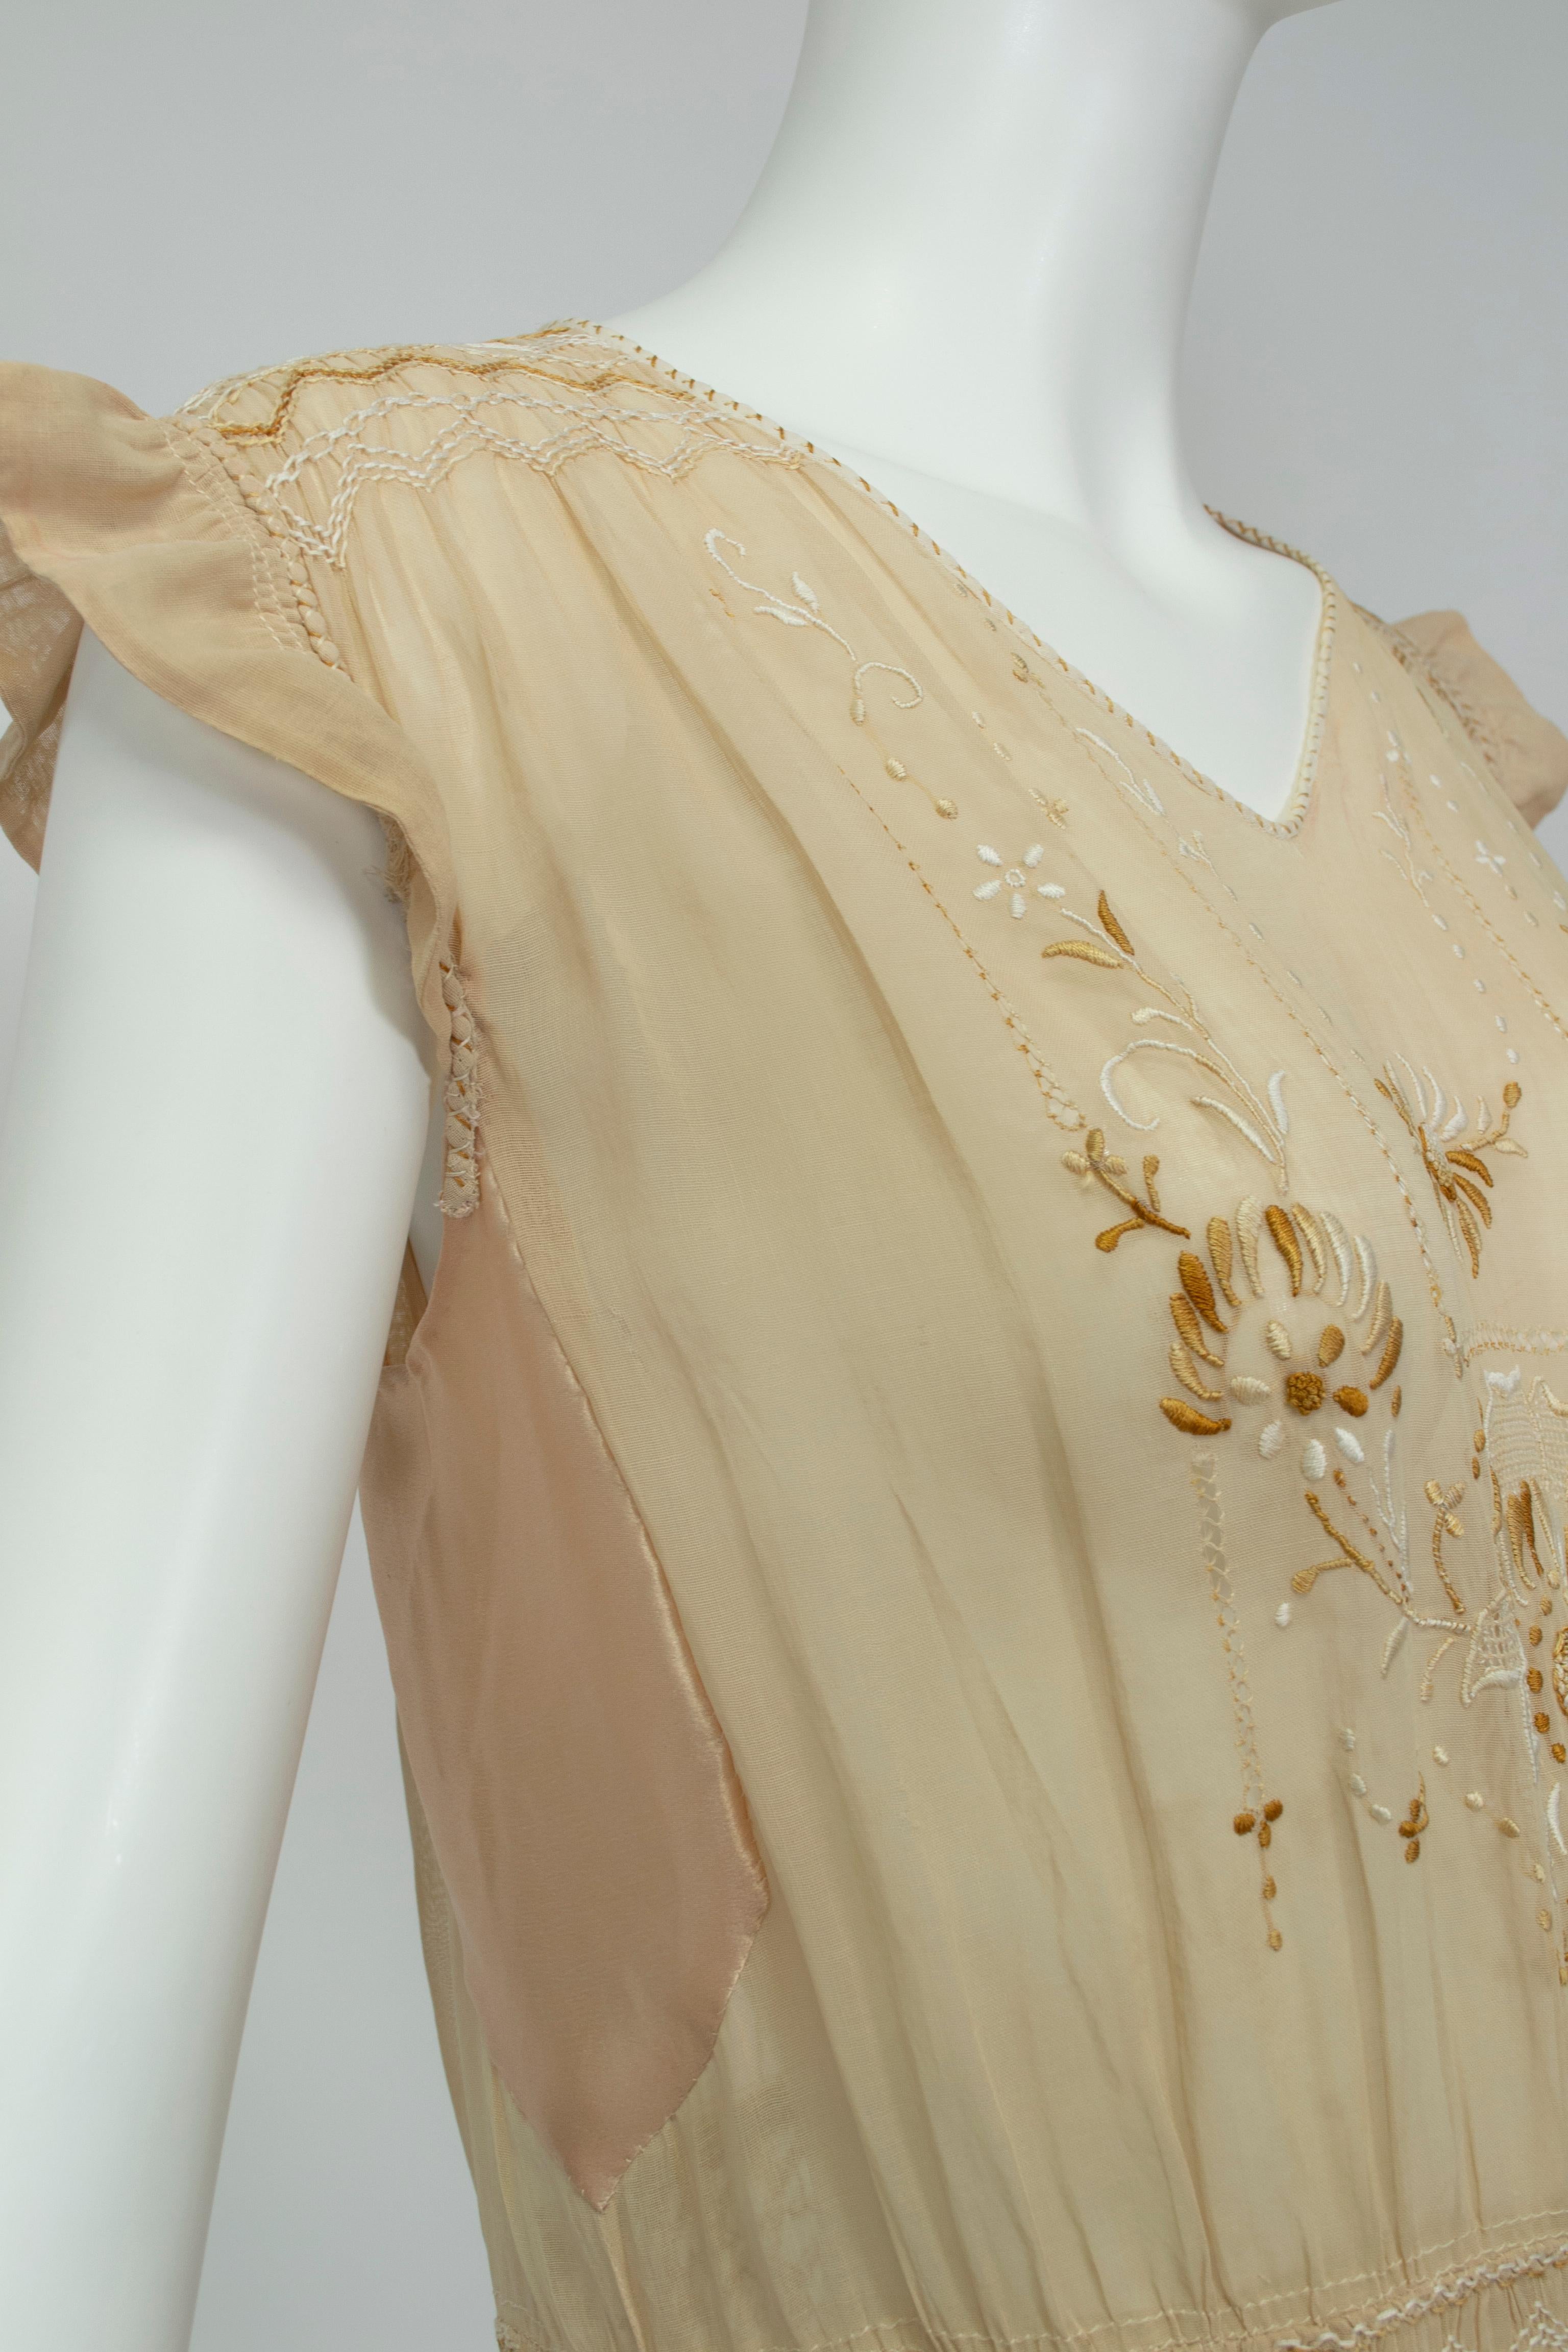 Beige Edwardian Nude Sheer Embroidered Voile and Satin Chemise Dress - M, 1910s